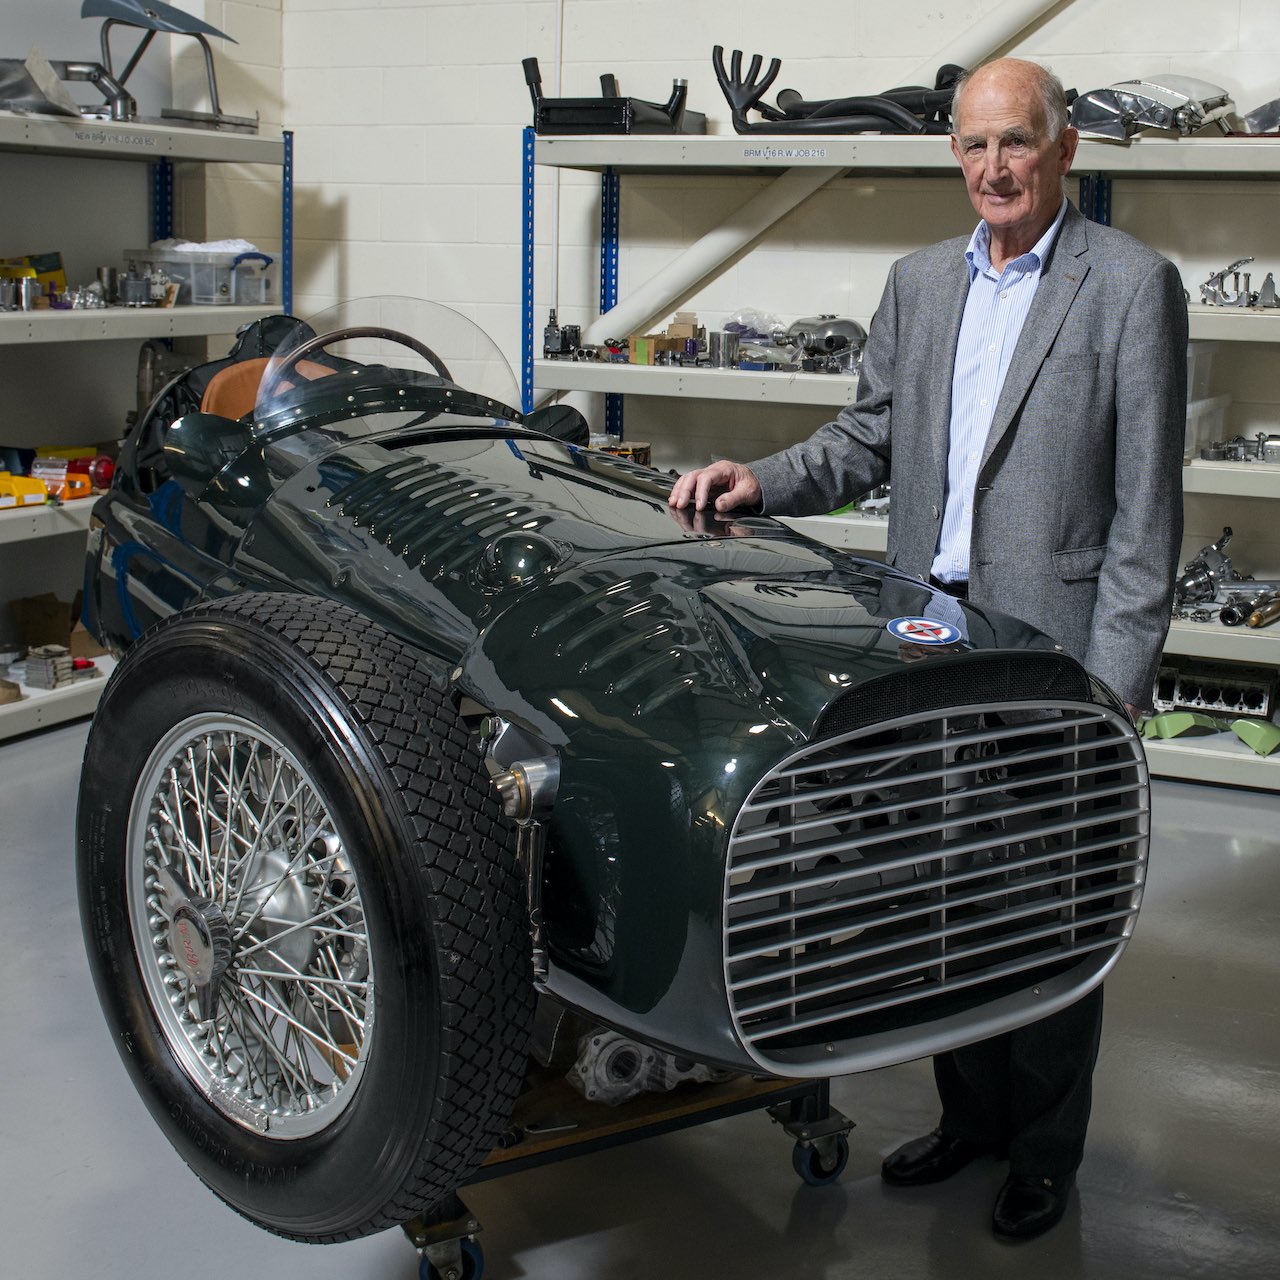 New BRM P15 V16 race car to mark 70th anniversary of British legend